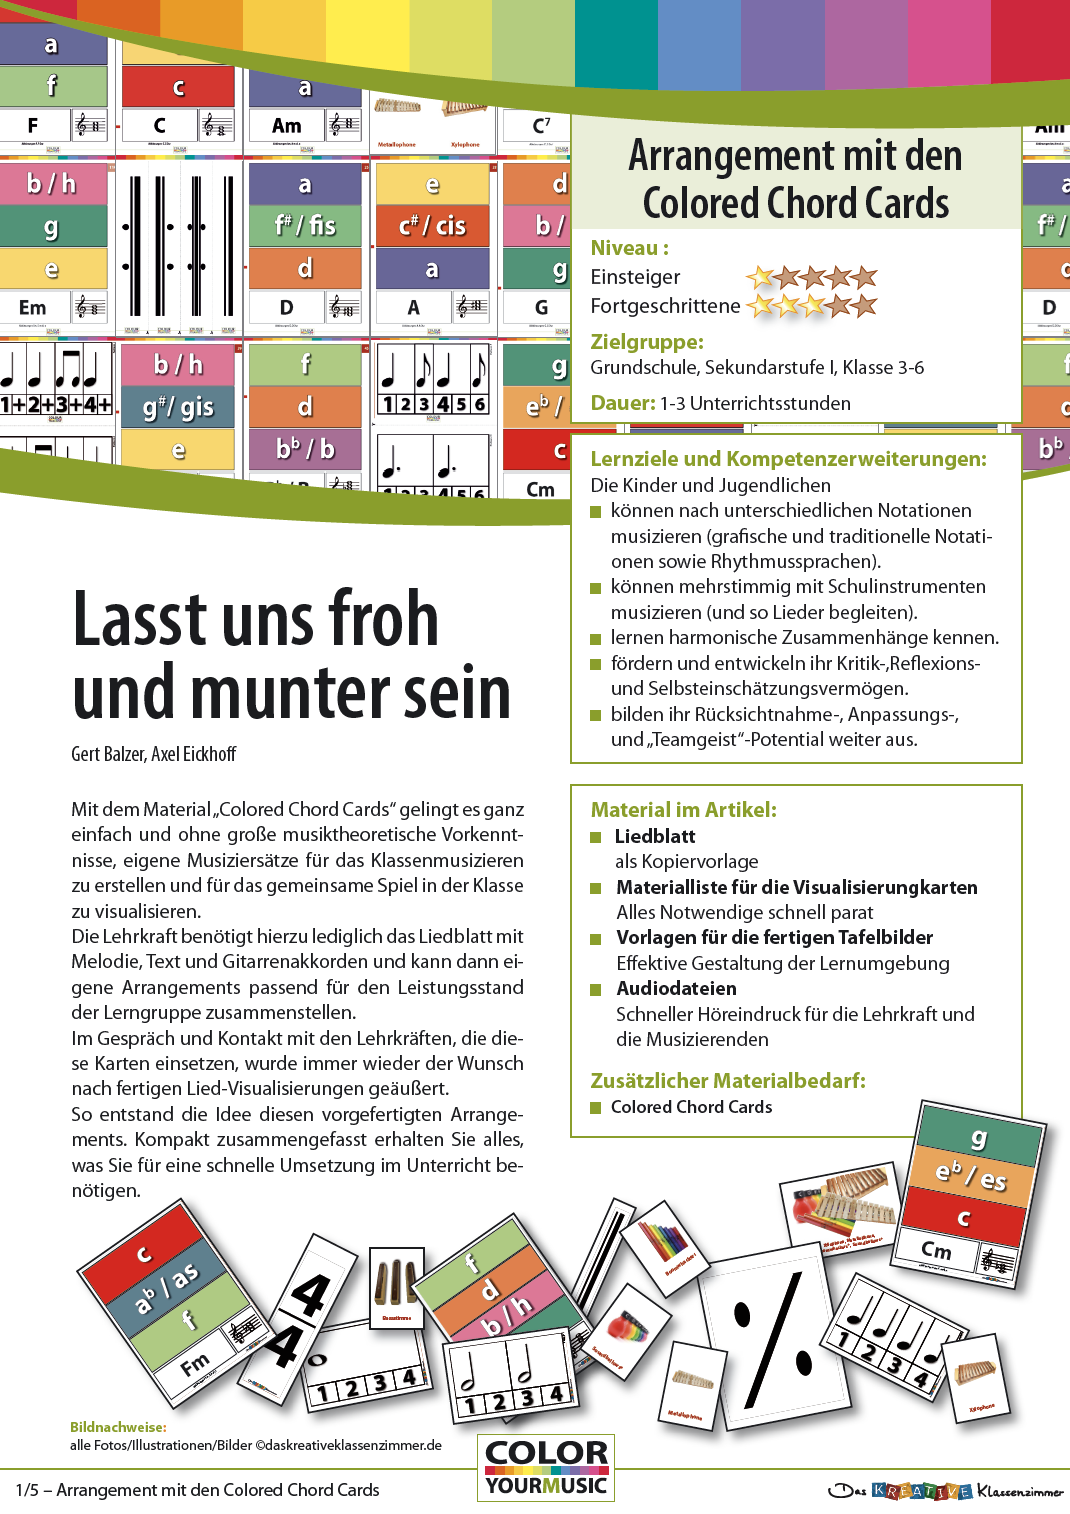 Lasst uns froh und munter sein - Colored Chord Cards